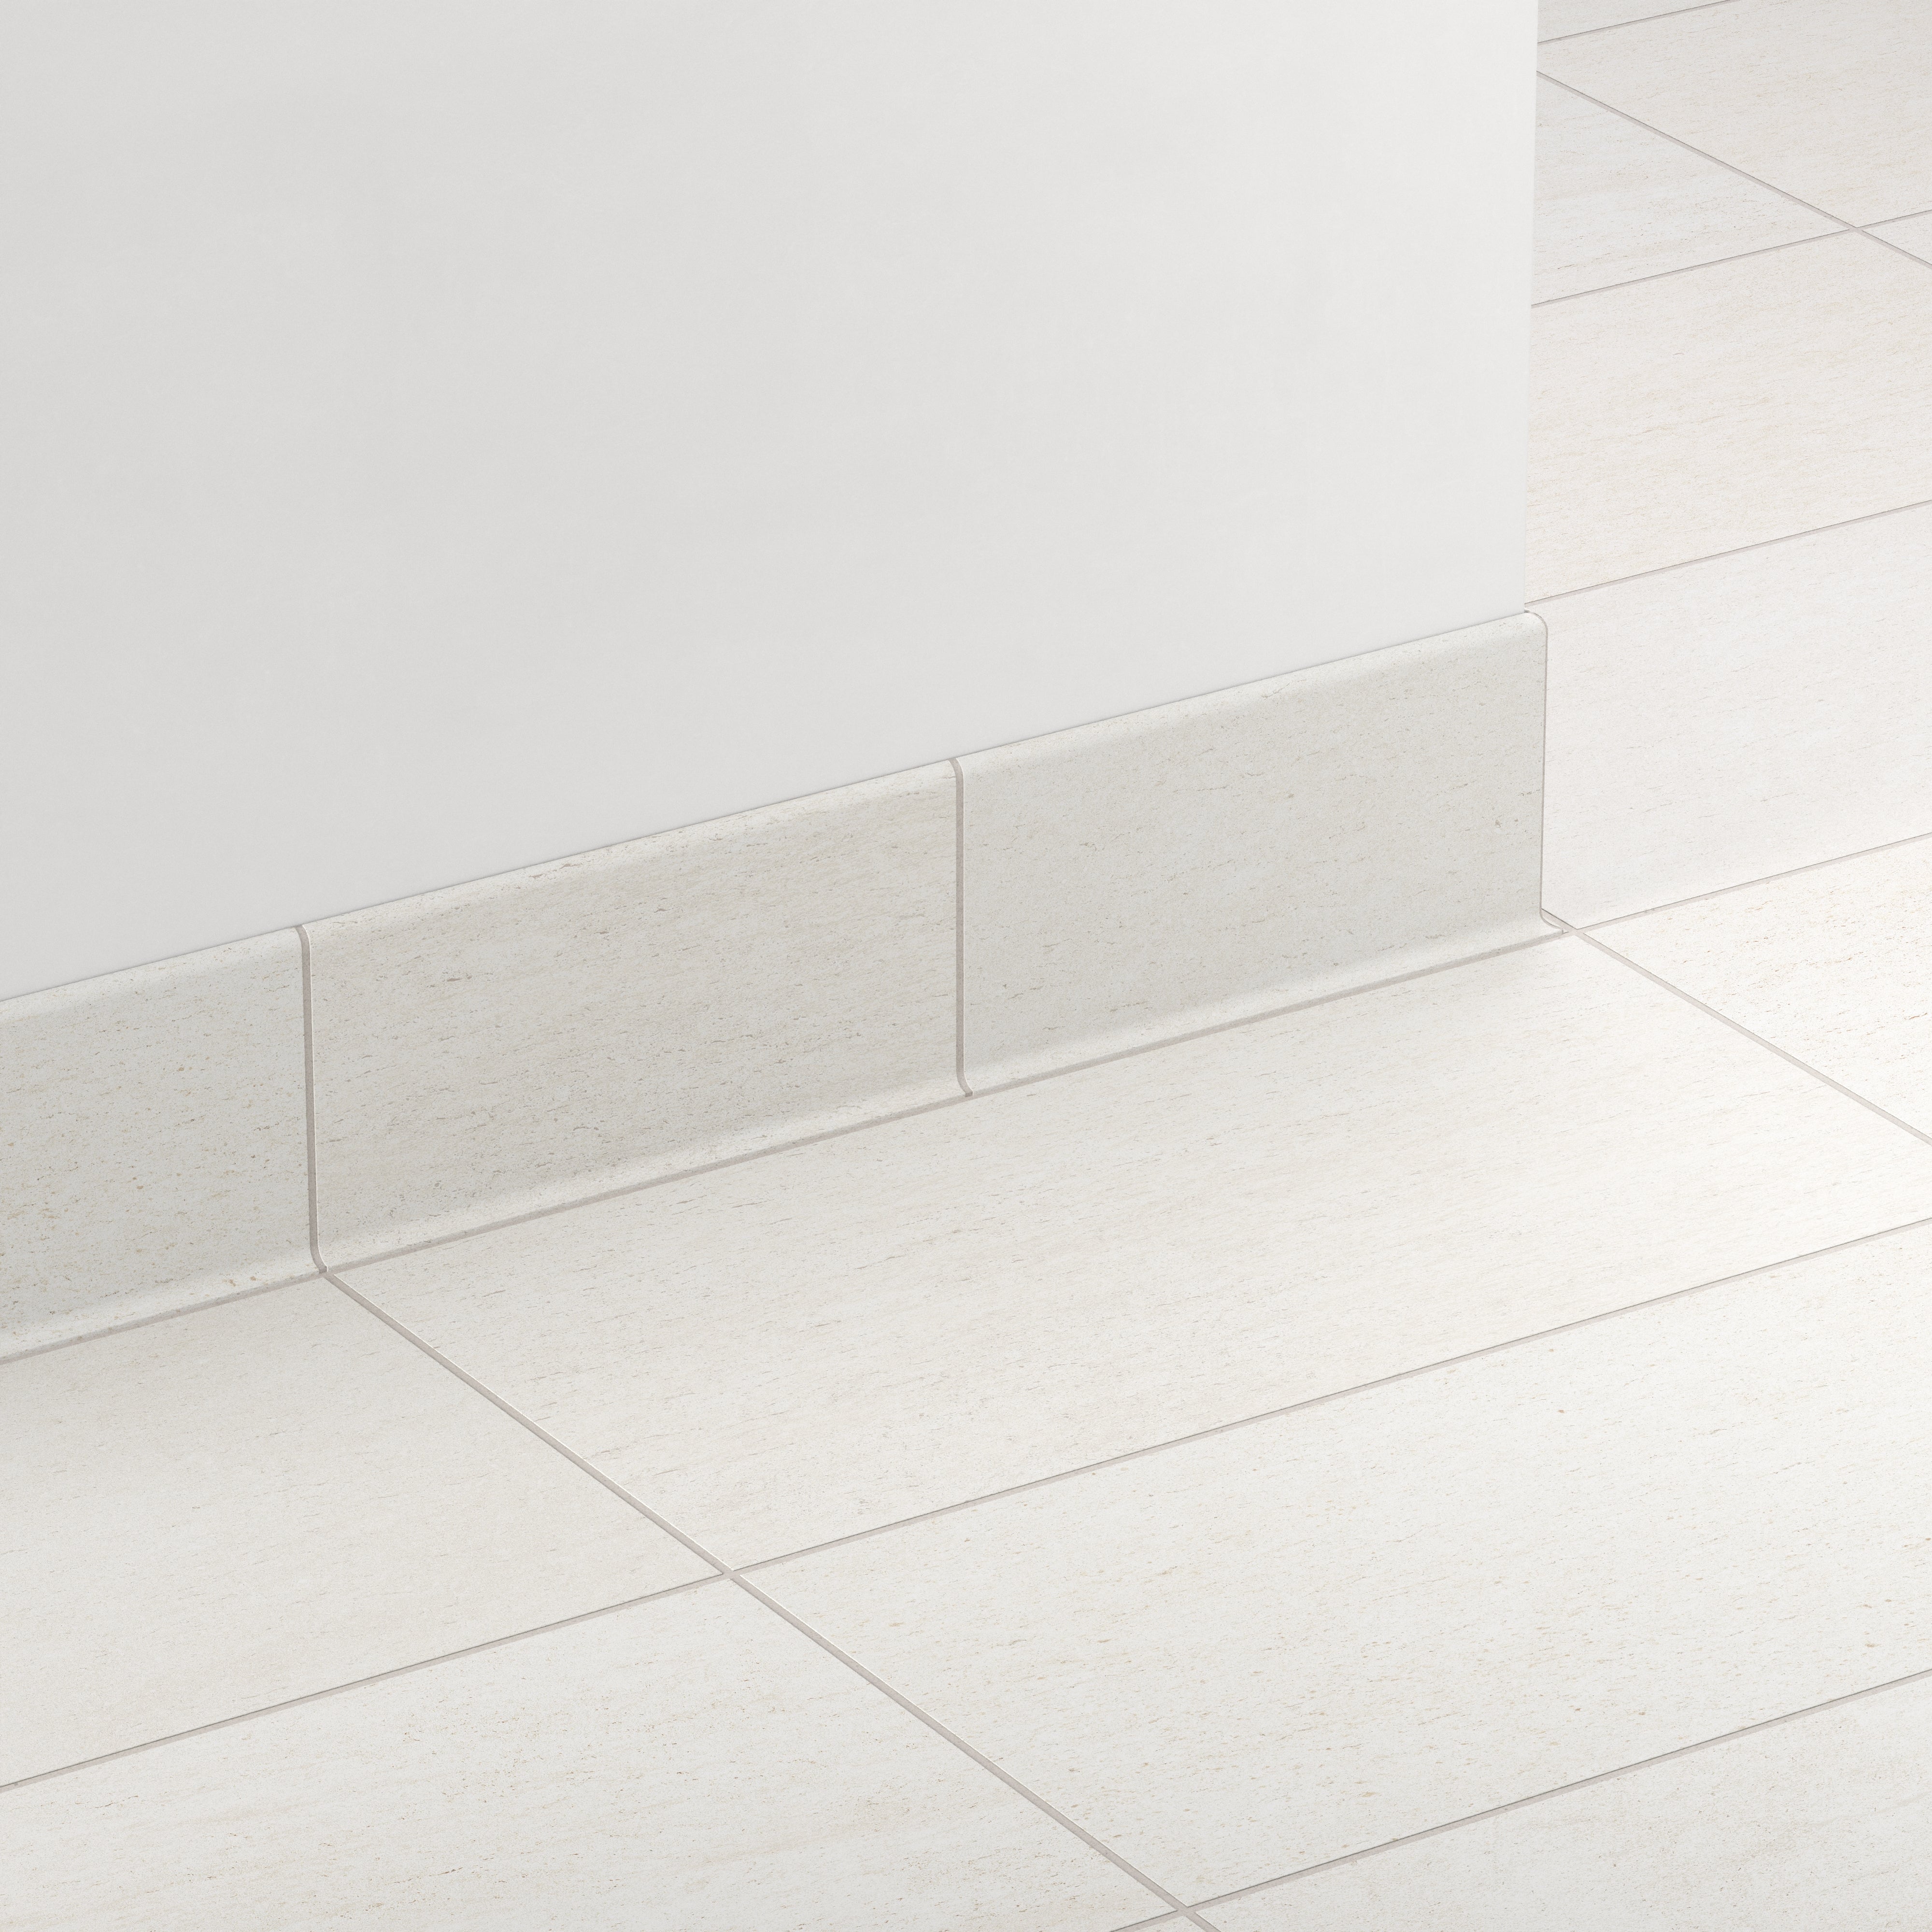 Brody 6x12 Matte Porcelain Cove Base Tile in Sand